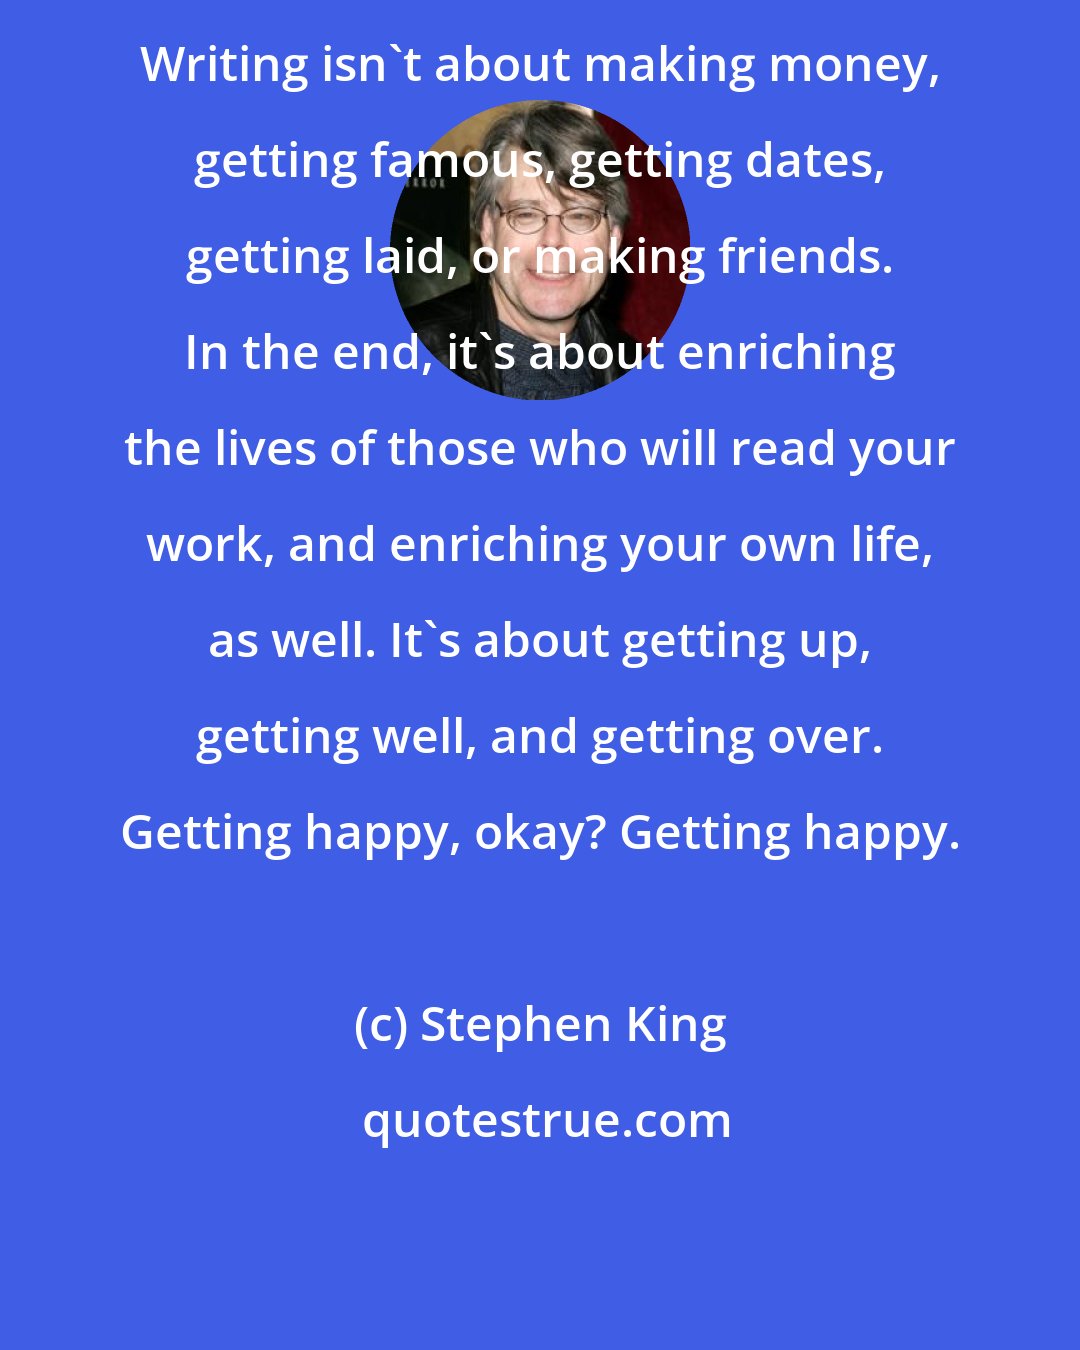 Stephen King: Writing isn't about making money, getting famous, getting dates, getting laid, or making friends. In the end, it's about enriching the lives of those who will read your work, and enriching your own life, as well. It's about getting up, getting well, and getting over. Getting happy, okay? Getting happy.